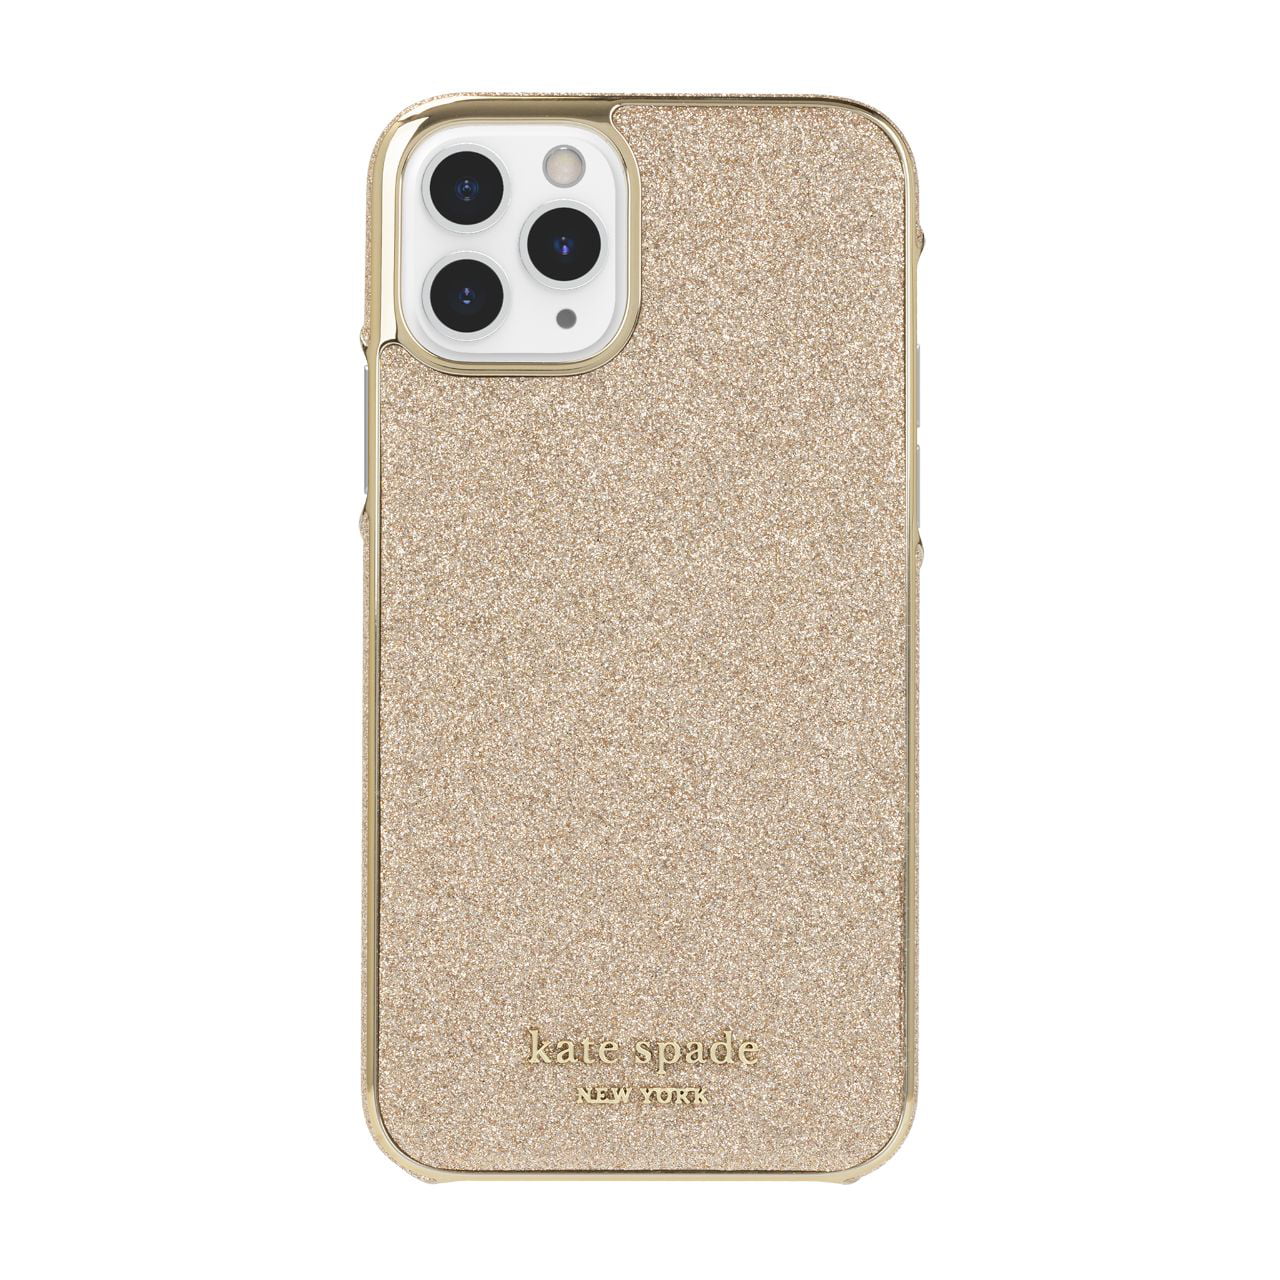 Kate Spade Wrap Case Gold Munera Glitter for iPhone 11 Pro ...